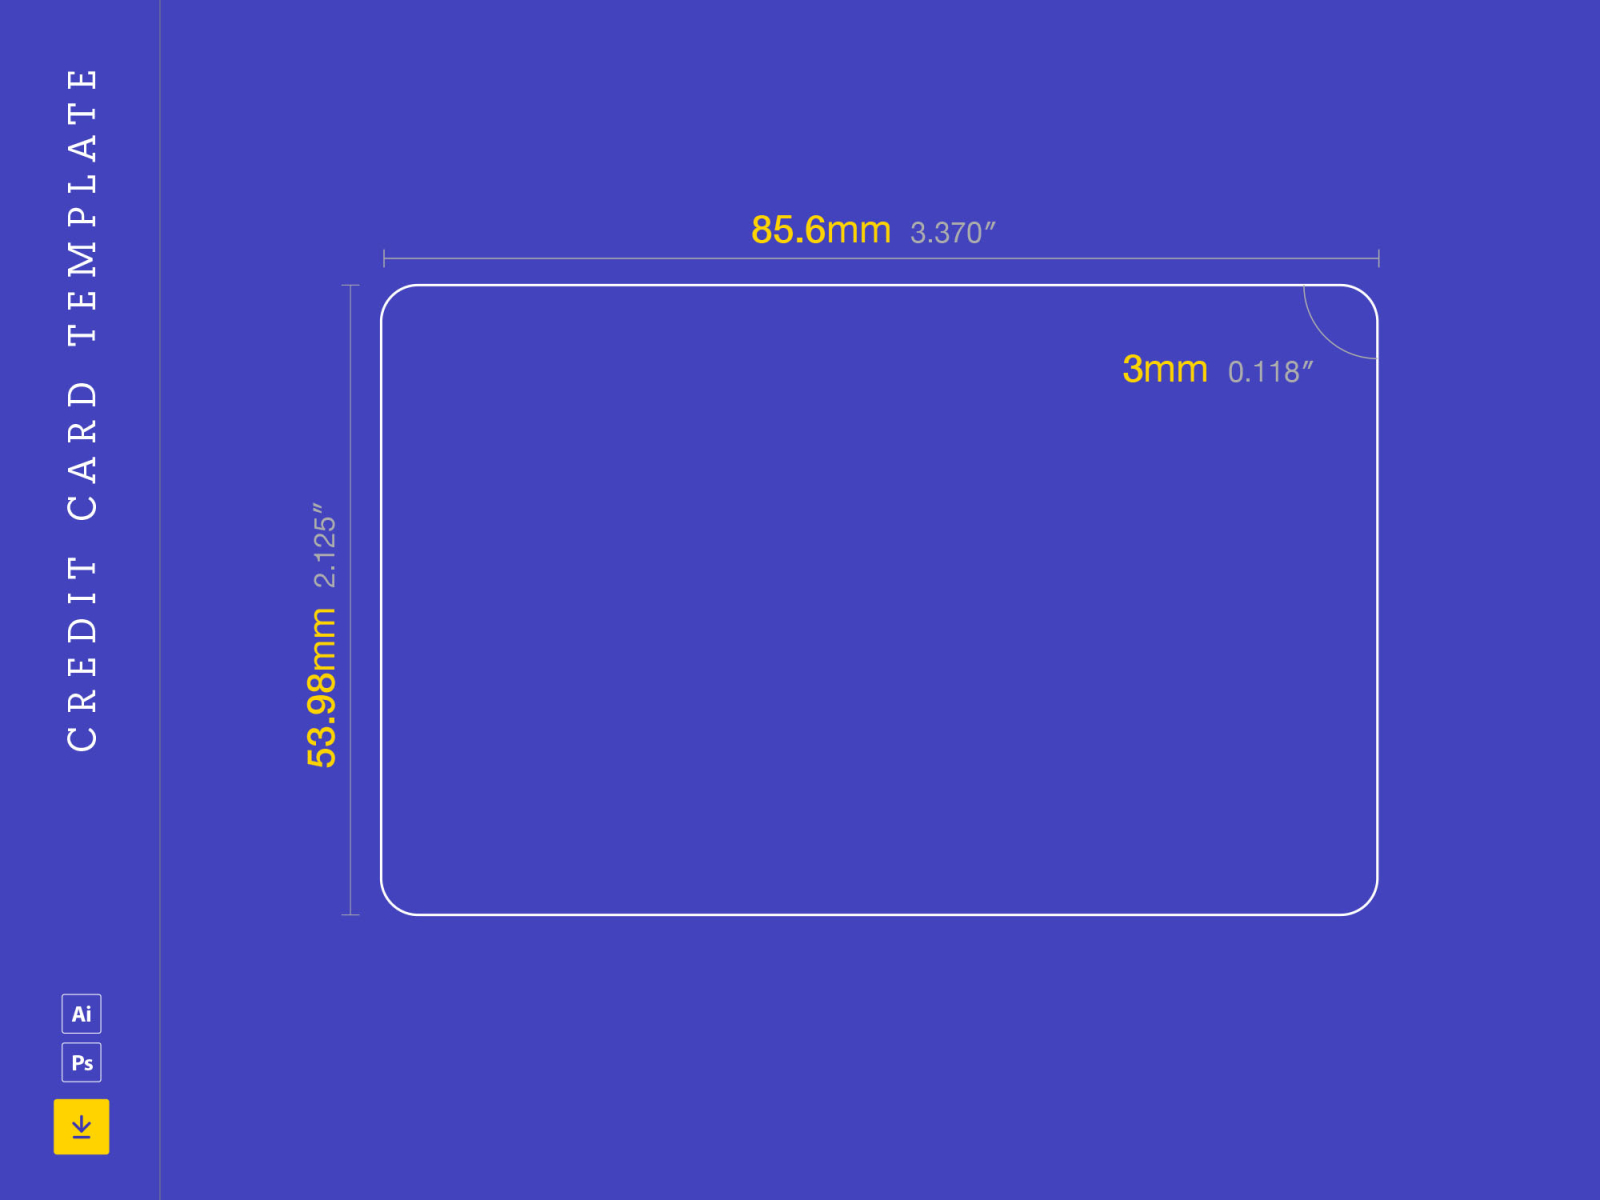 Credit Card Size Template